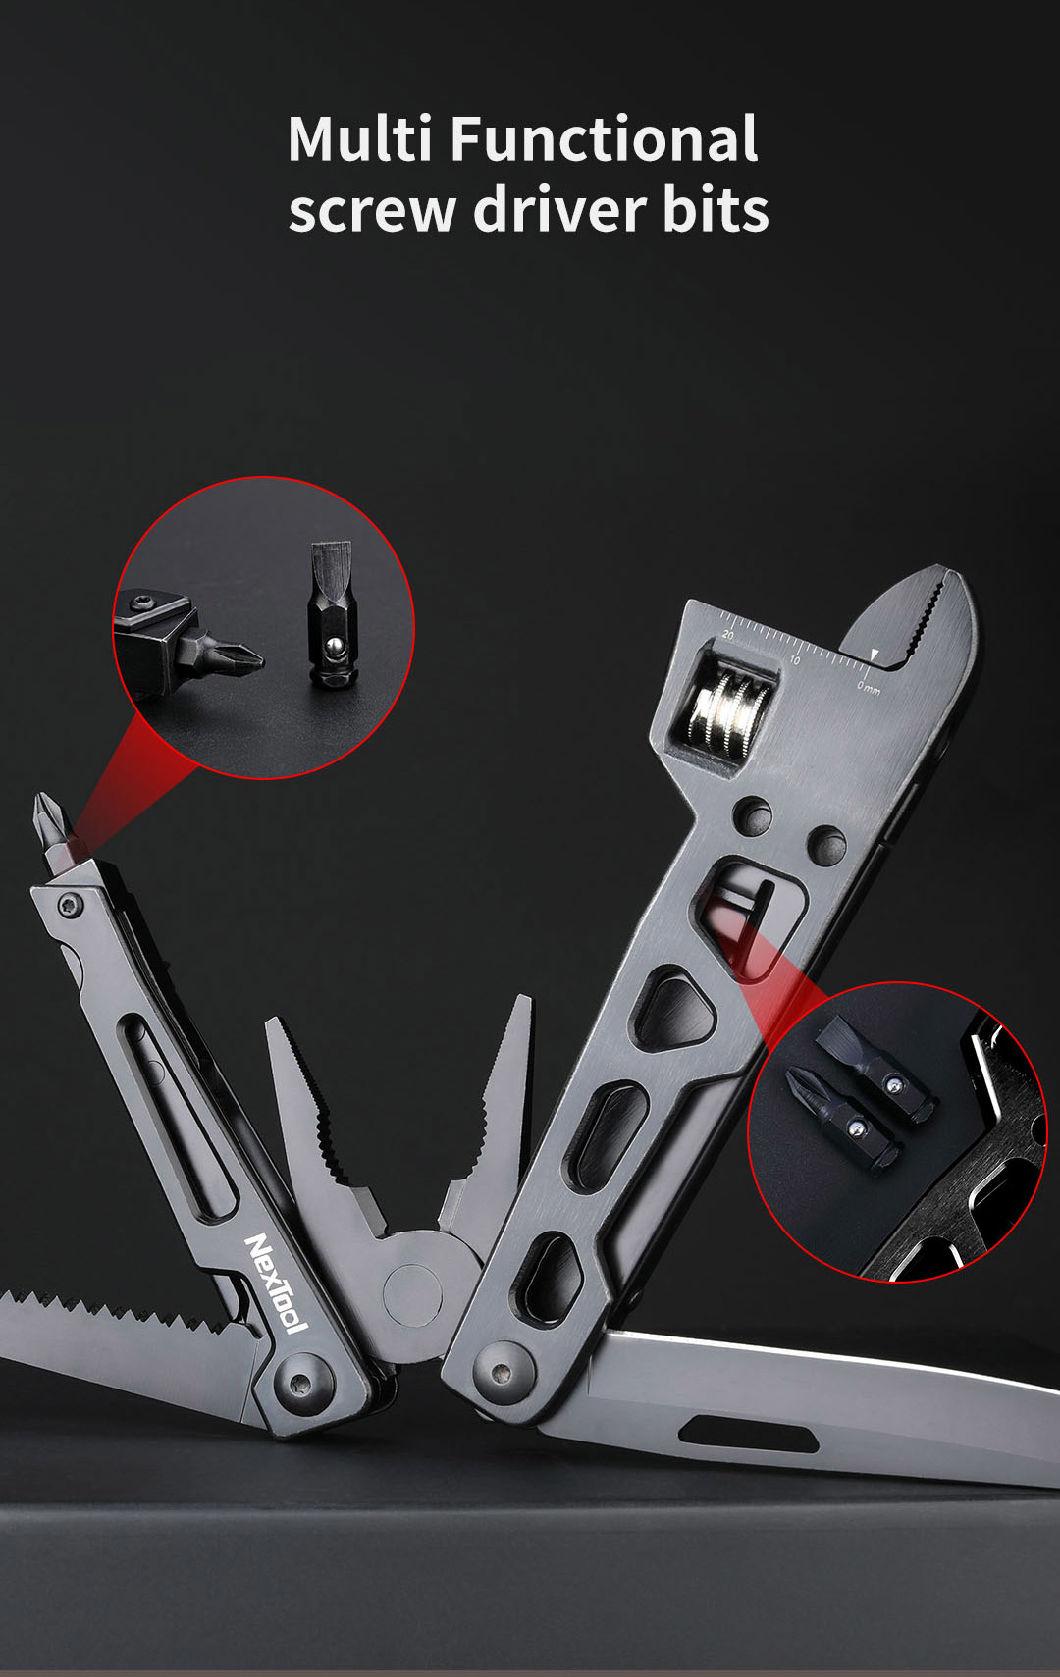 Nextool Patented Design Portable Pliers Wrench Multitool for Outdoor Camping